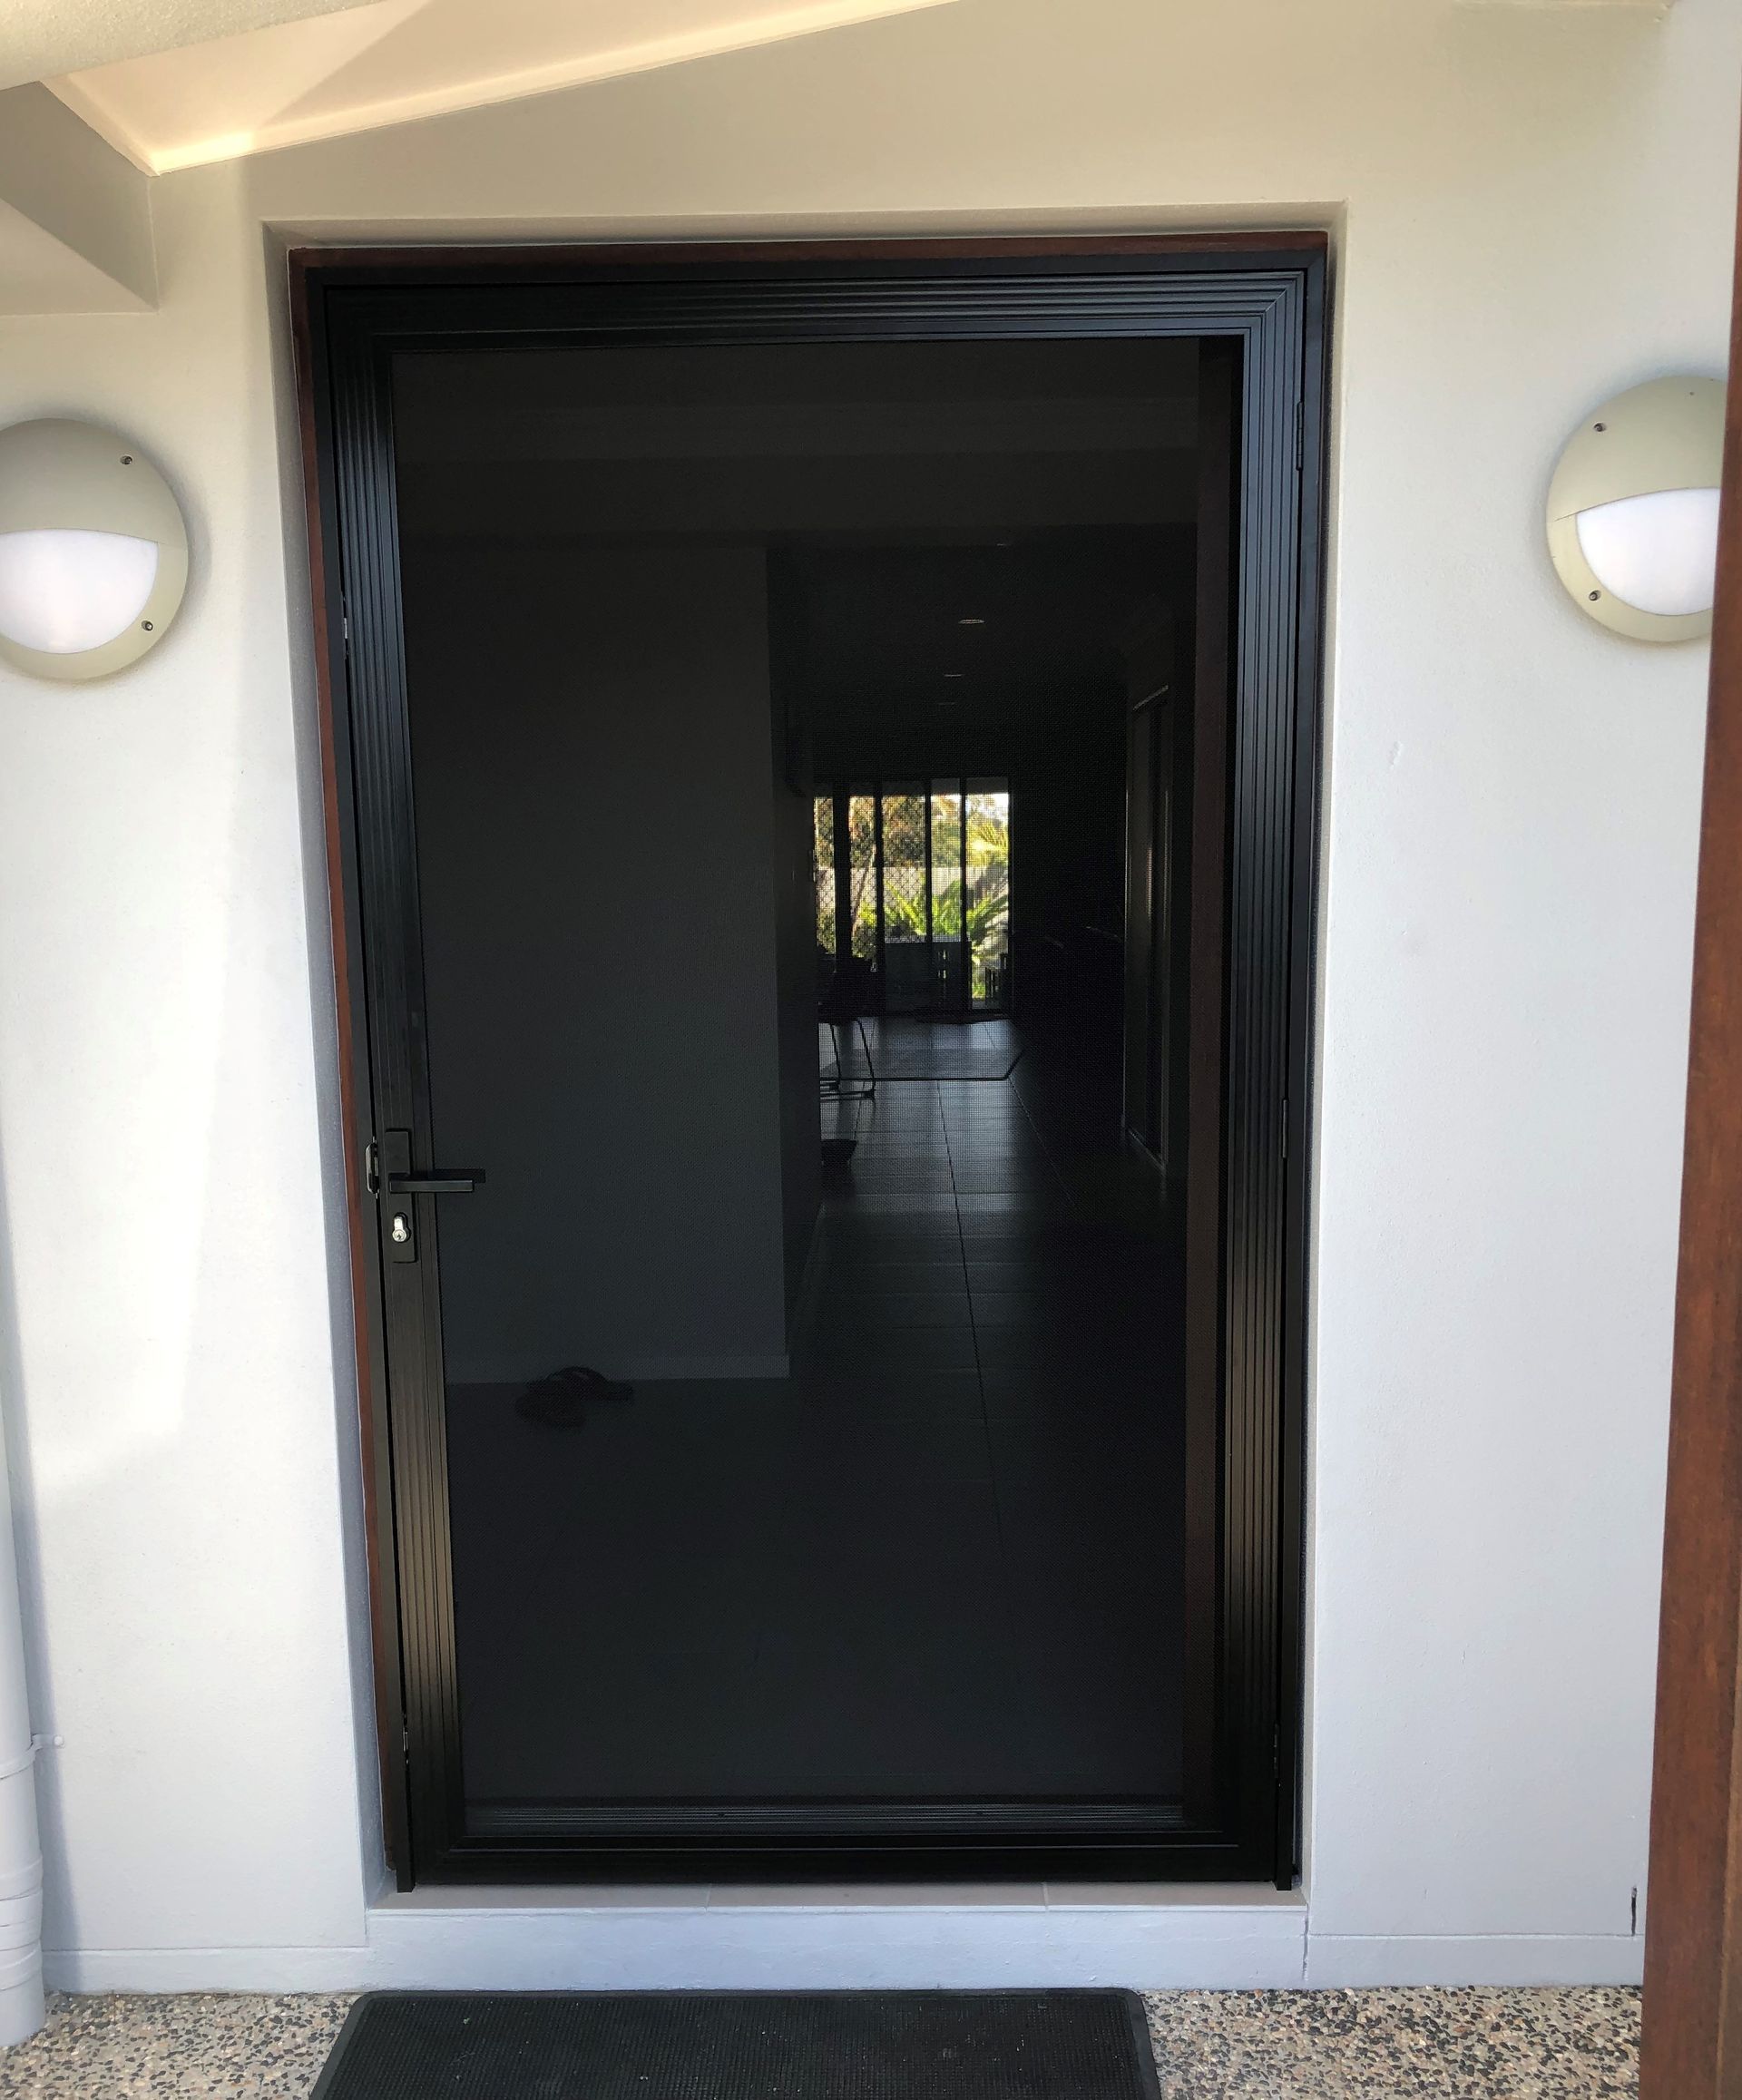 An image of a stainless steel security door with black frame on the front entrance of a house